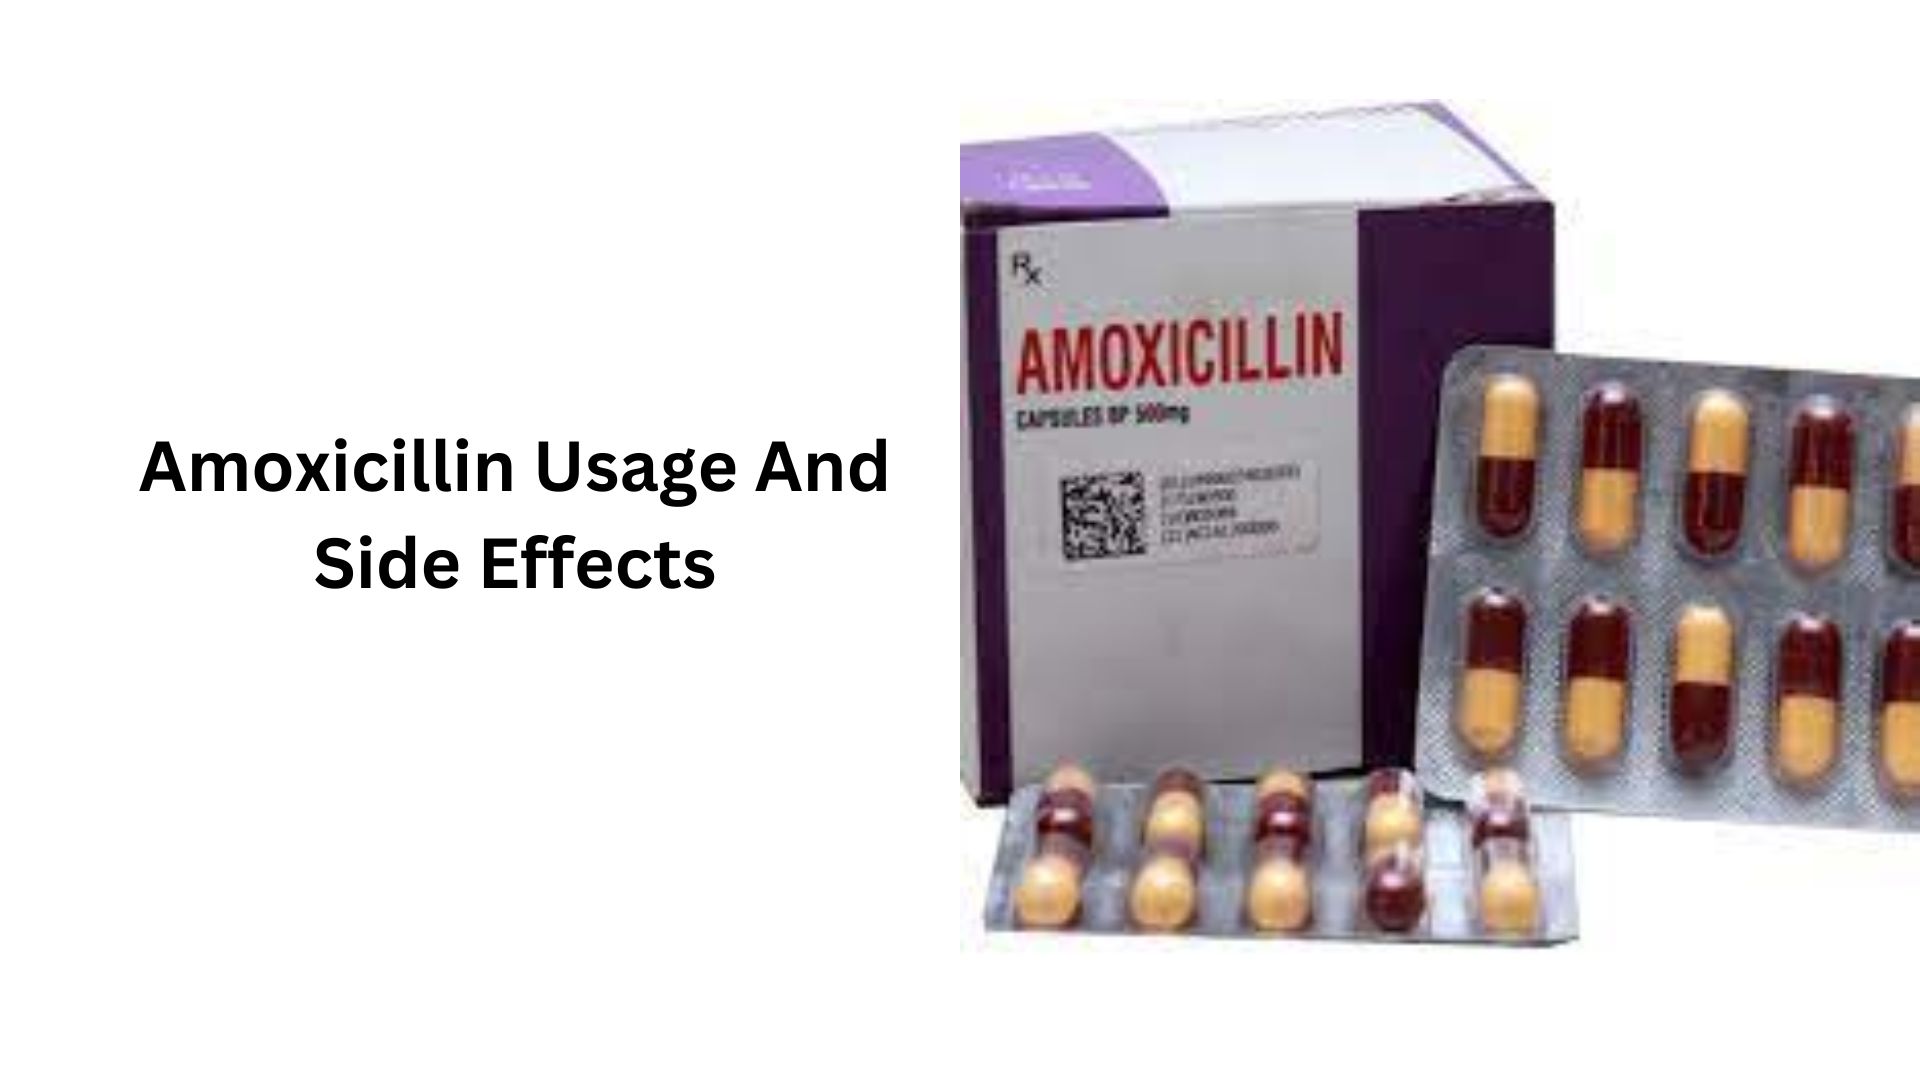 Amoxicillin Usage And Side Effects